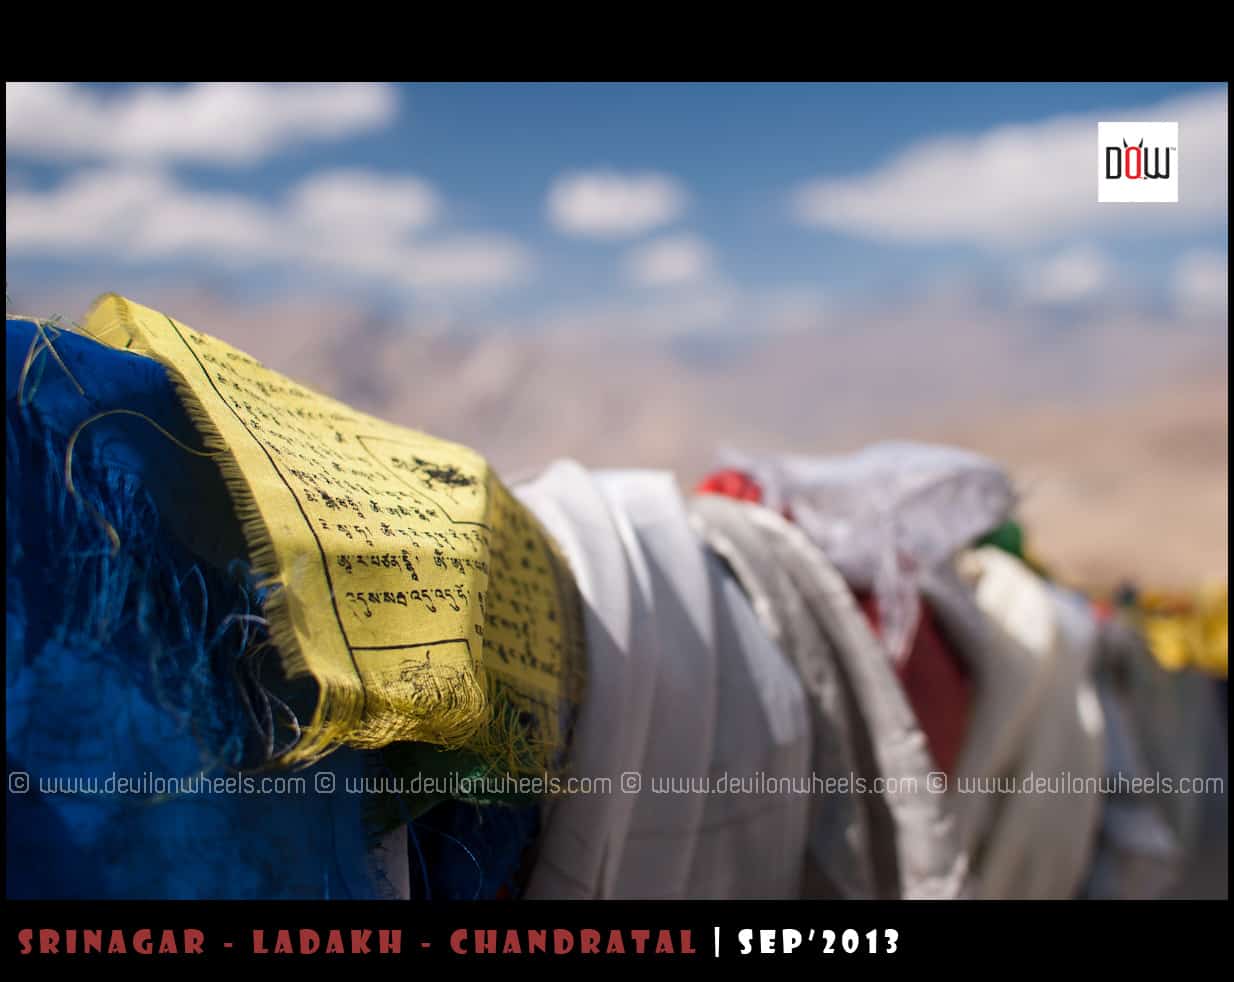 Prayer Flags at Passes... Showering Blessings with the Wind